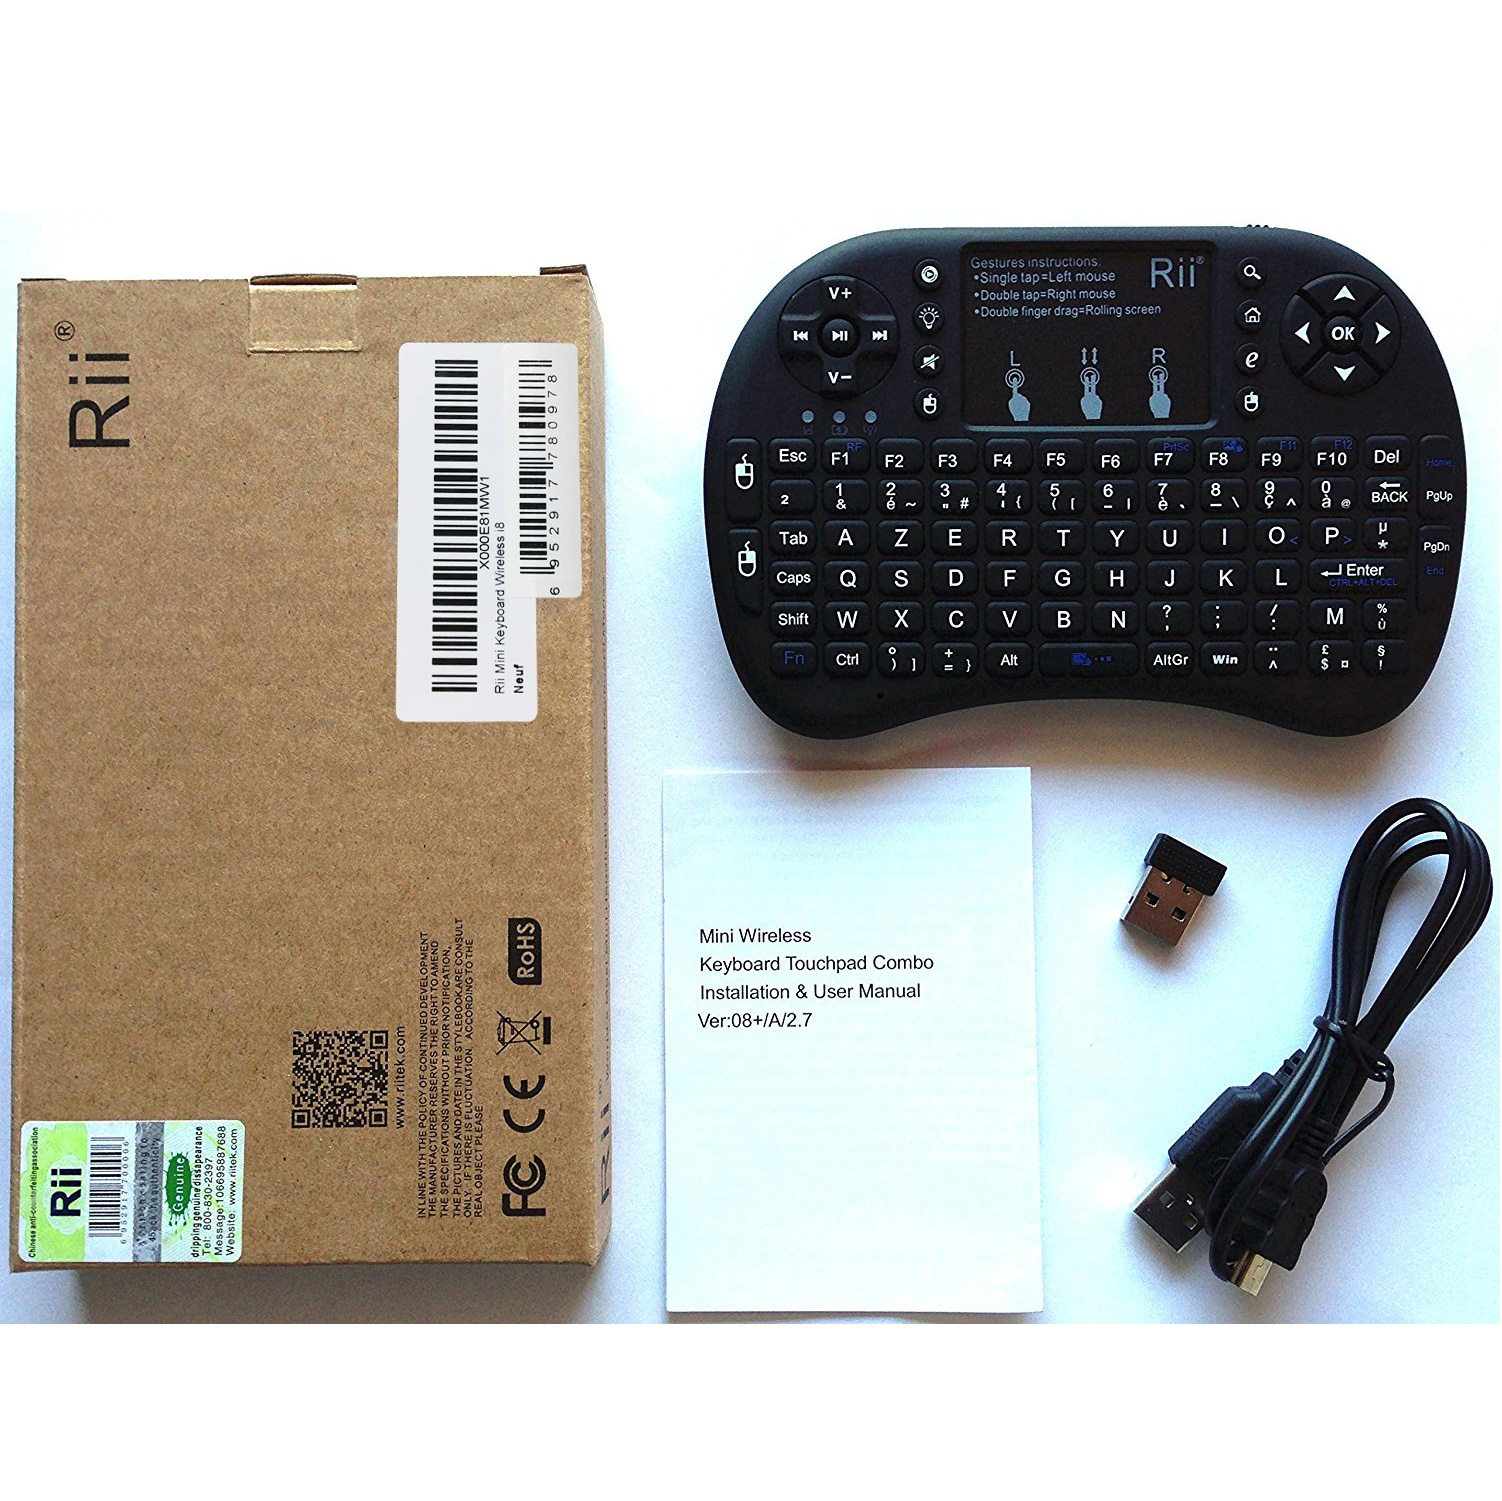 Rii i8 plus Mini Wireless keyboard (Bluetooth) for Windows, Mac, Linux and Android. Inc. MULTI-touch touchpad. Li-Ion Battery